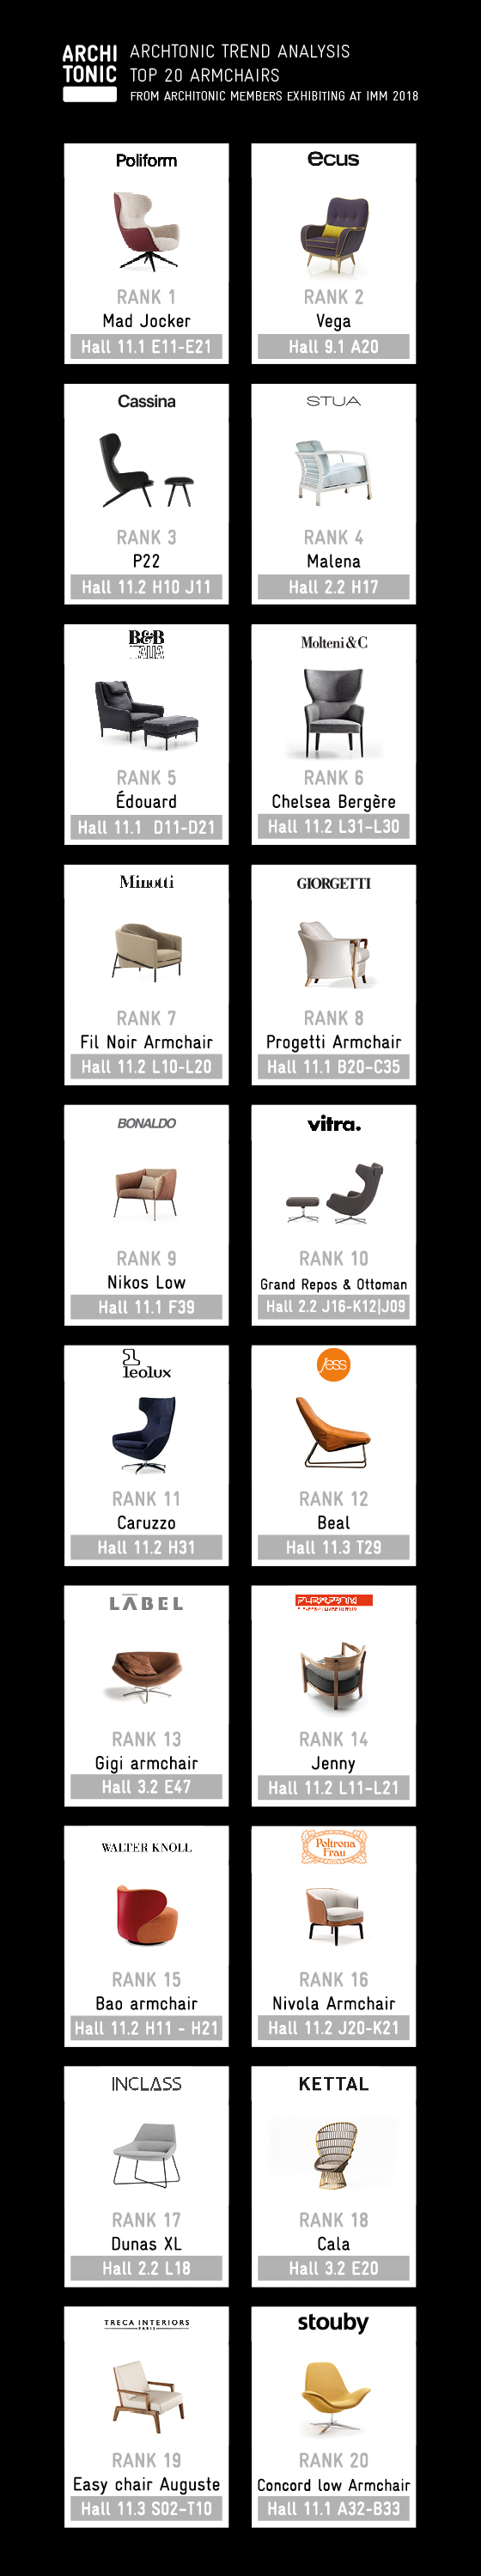 Top 20 Armchairs at imm cologne 2018 | Architonic Trend Analysis